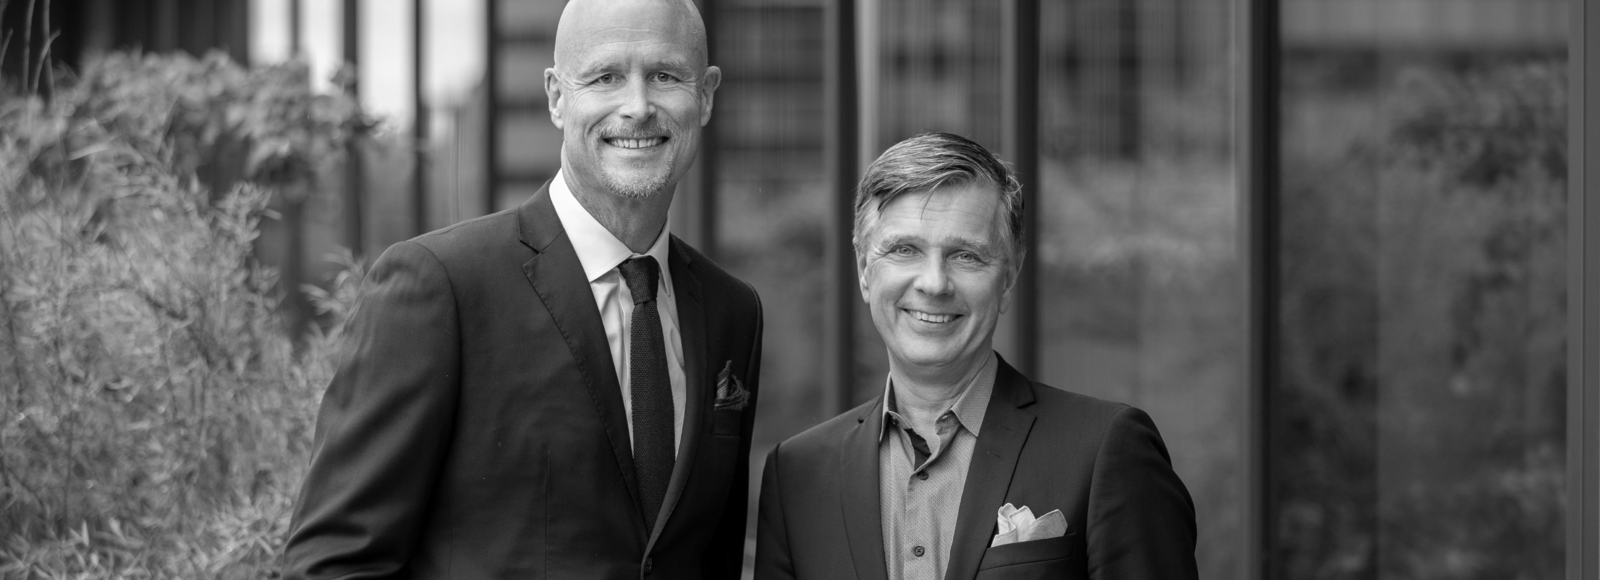 Photo showing our new COO Anders Fernström next to our CMP Peter Näslund